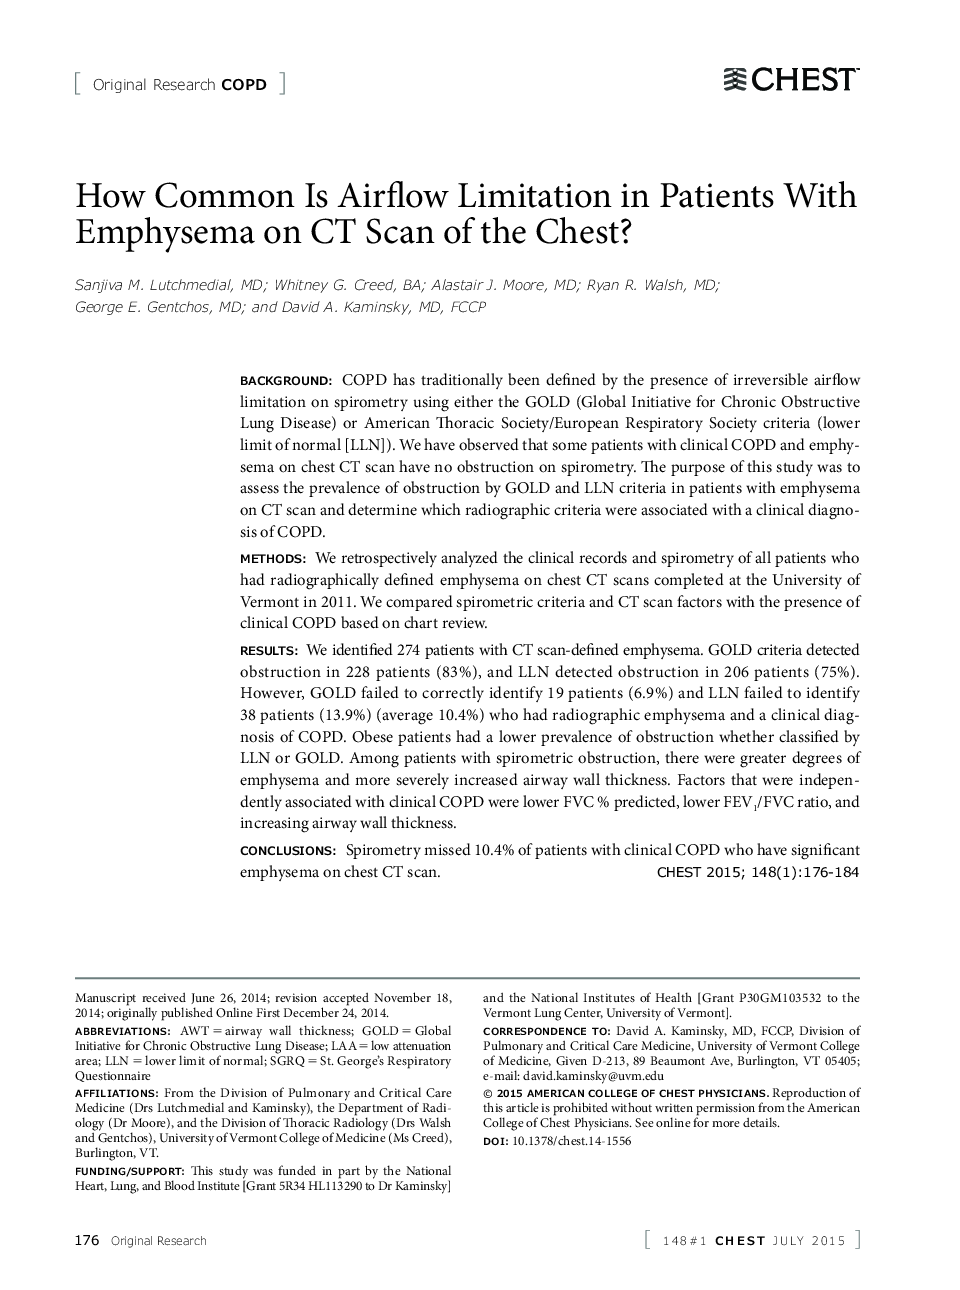 How Common Is Airflow Limitation in Patients With Emphysema on CT Scan of the Chest?